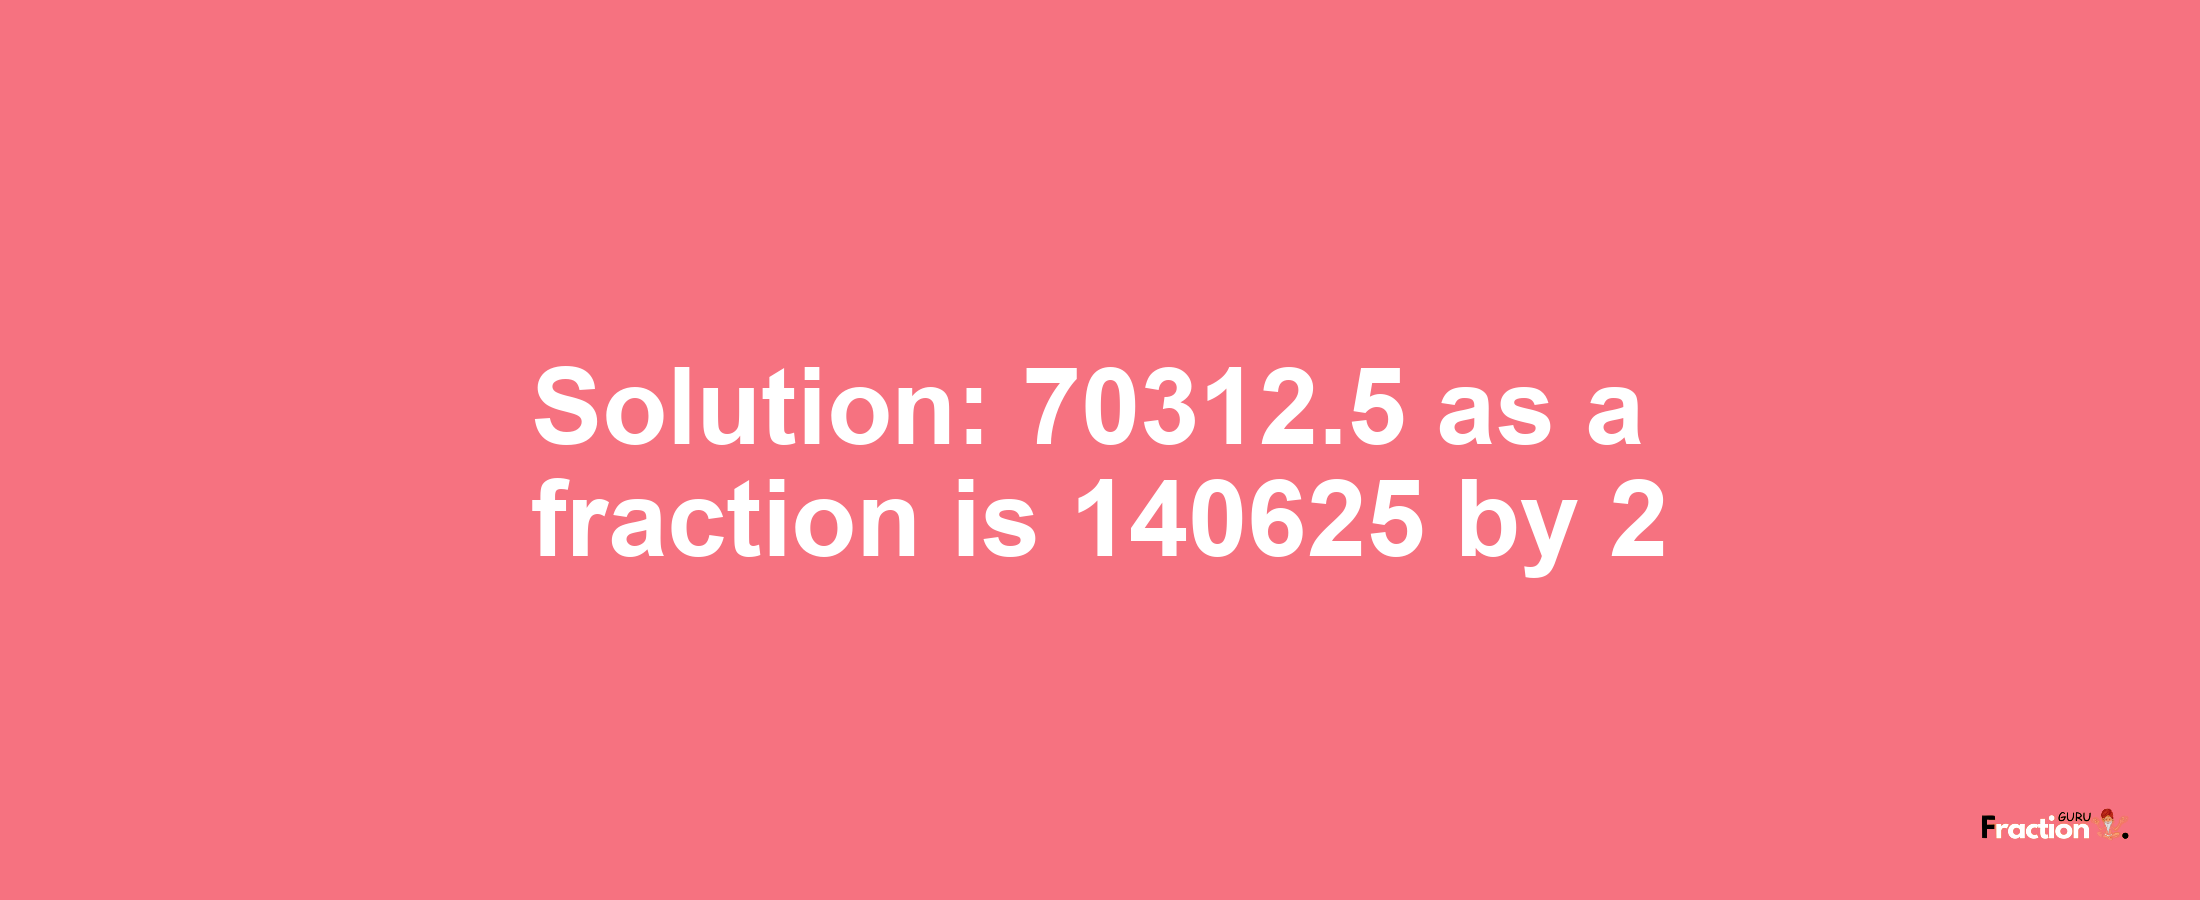 Solution:70312.5 as a fraction is 140625/2